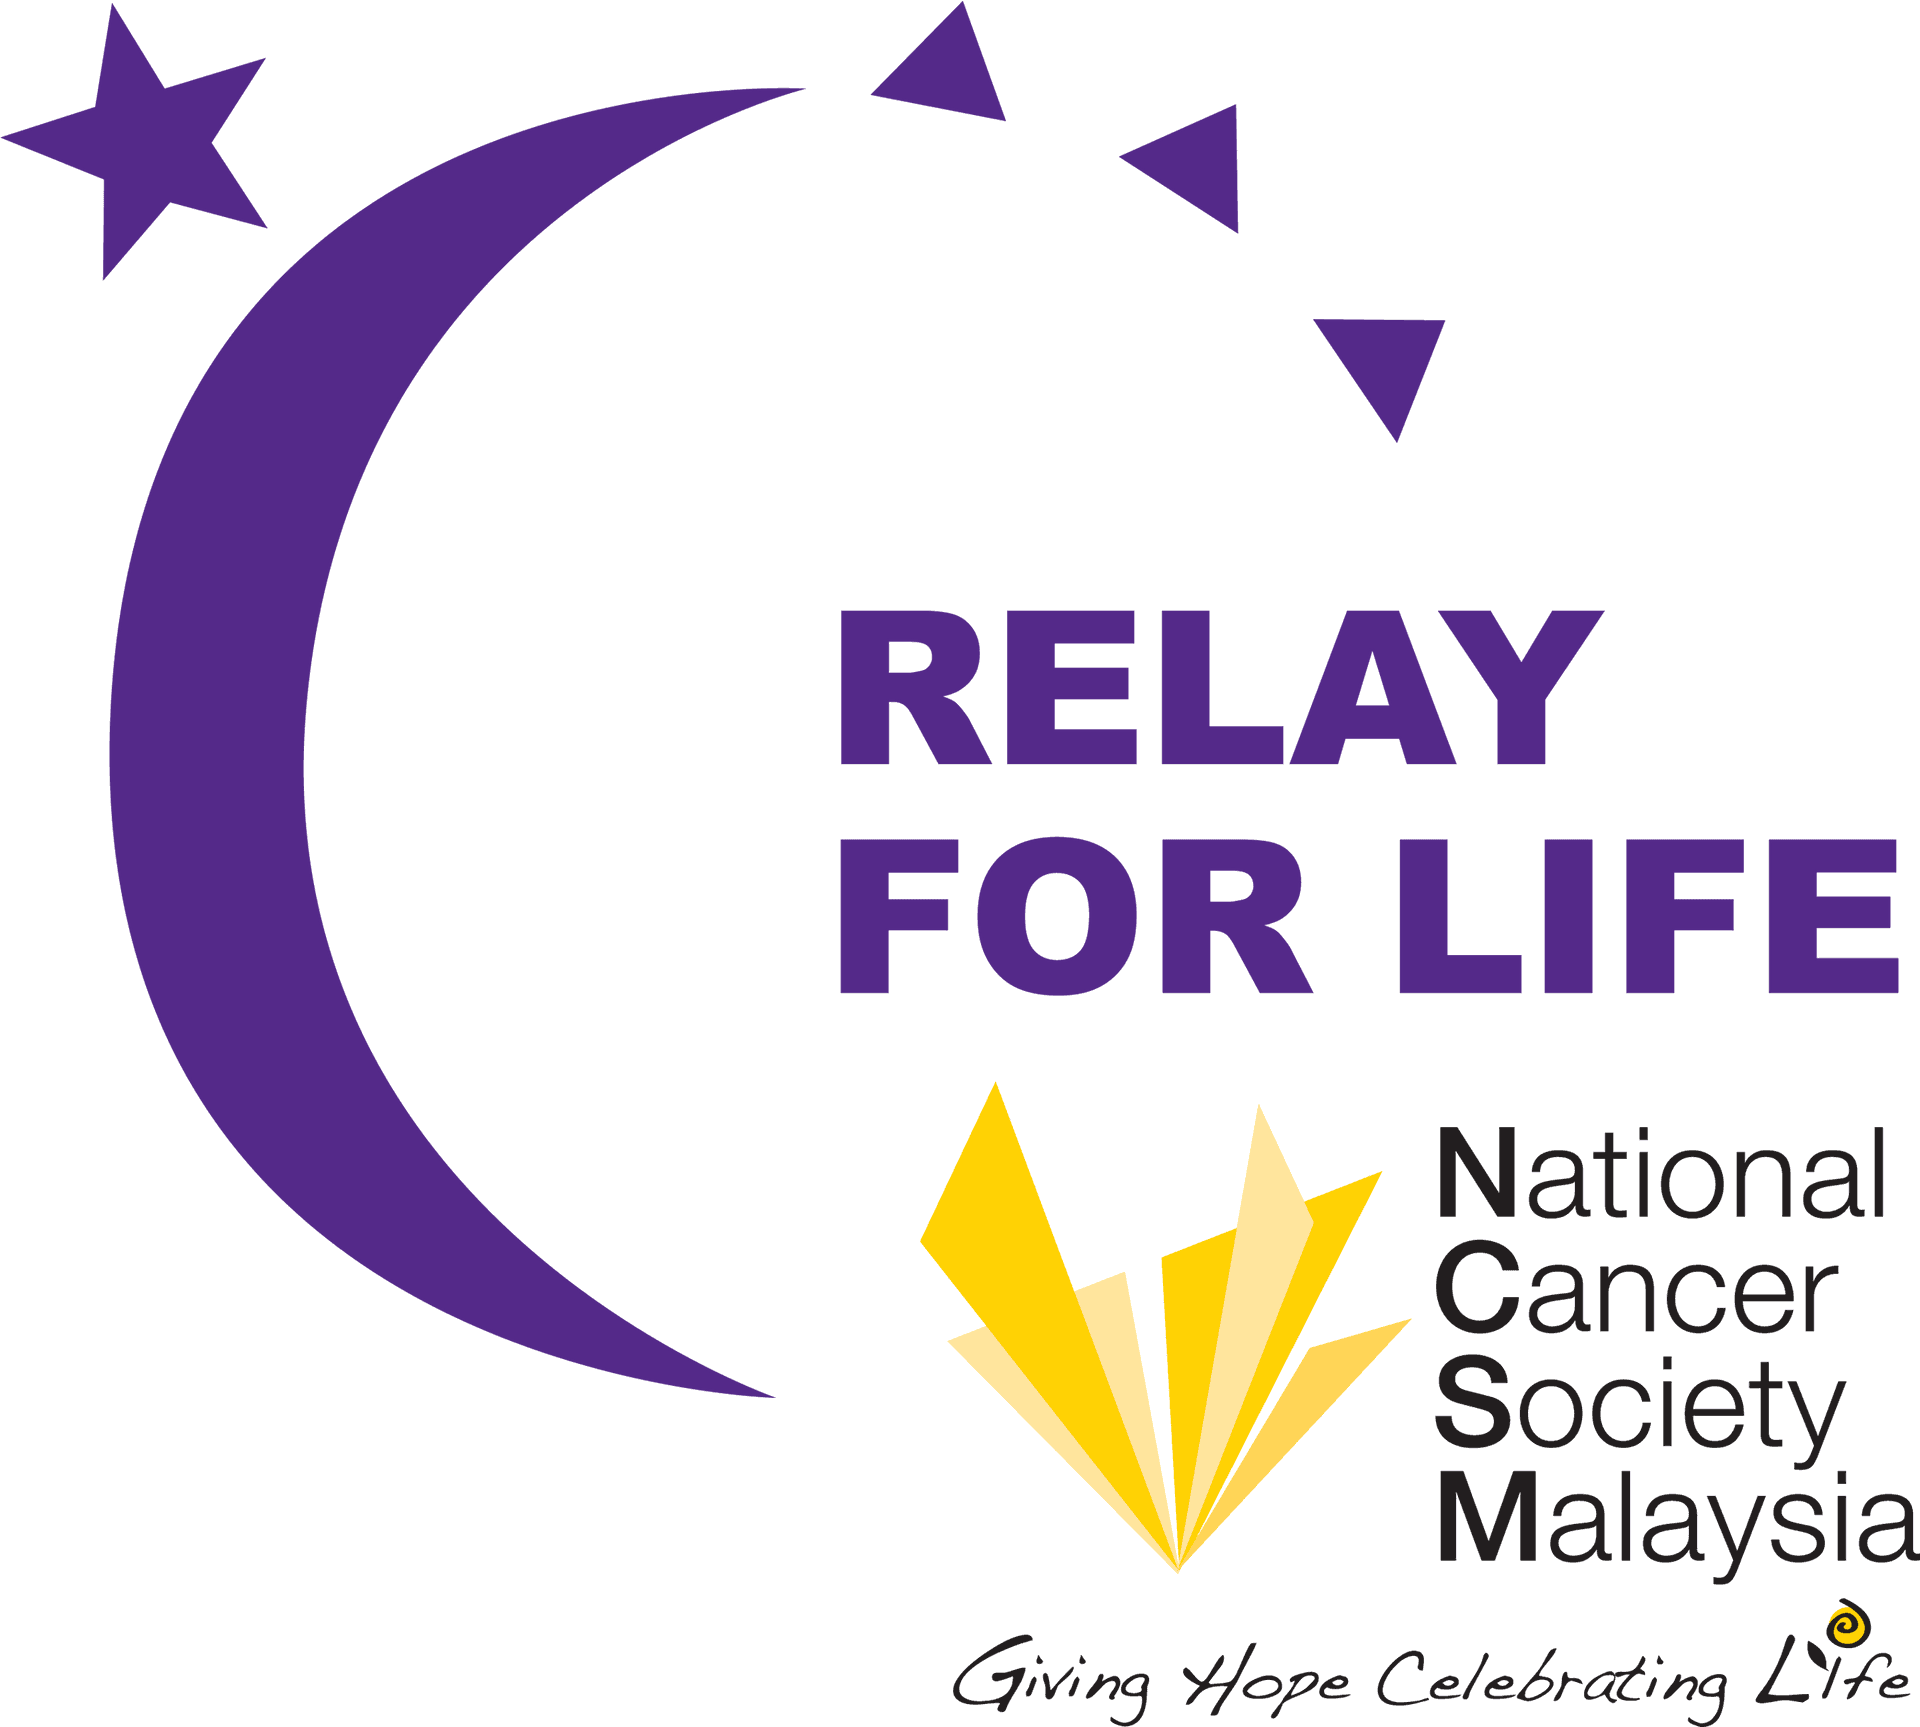 [100+] Relay For Life Logo Png Images | Wallpapers.com